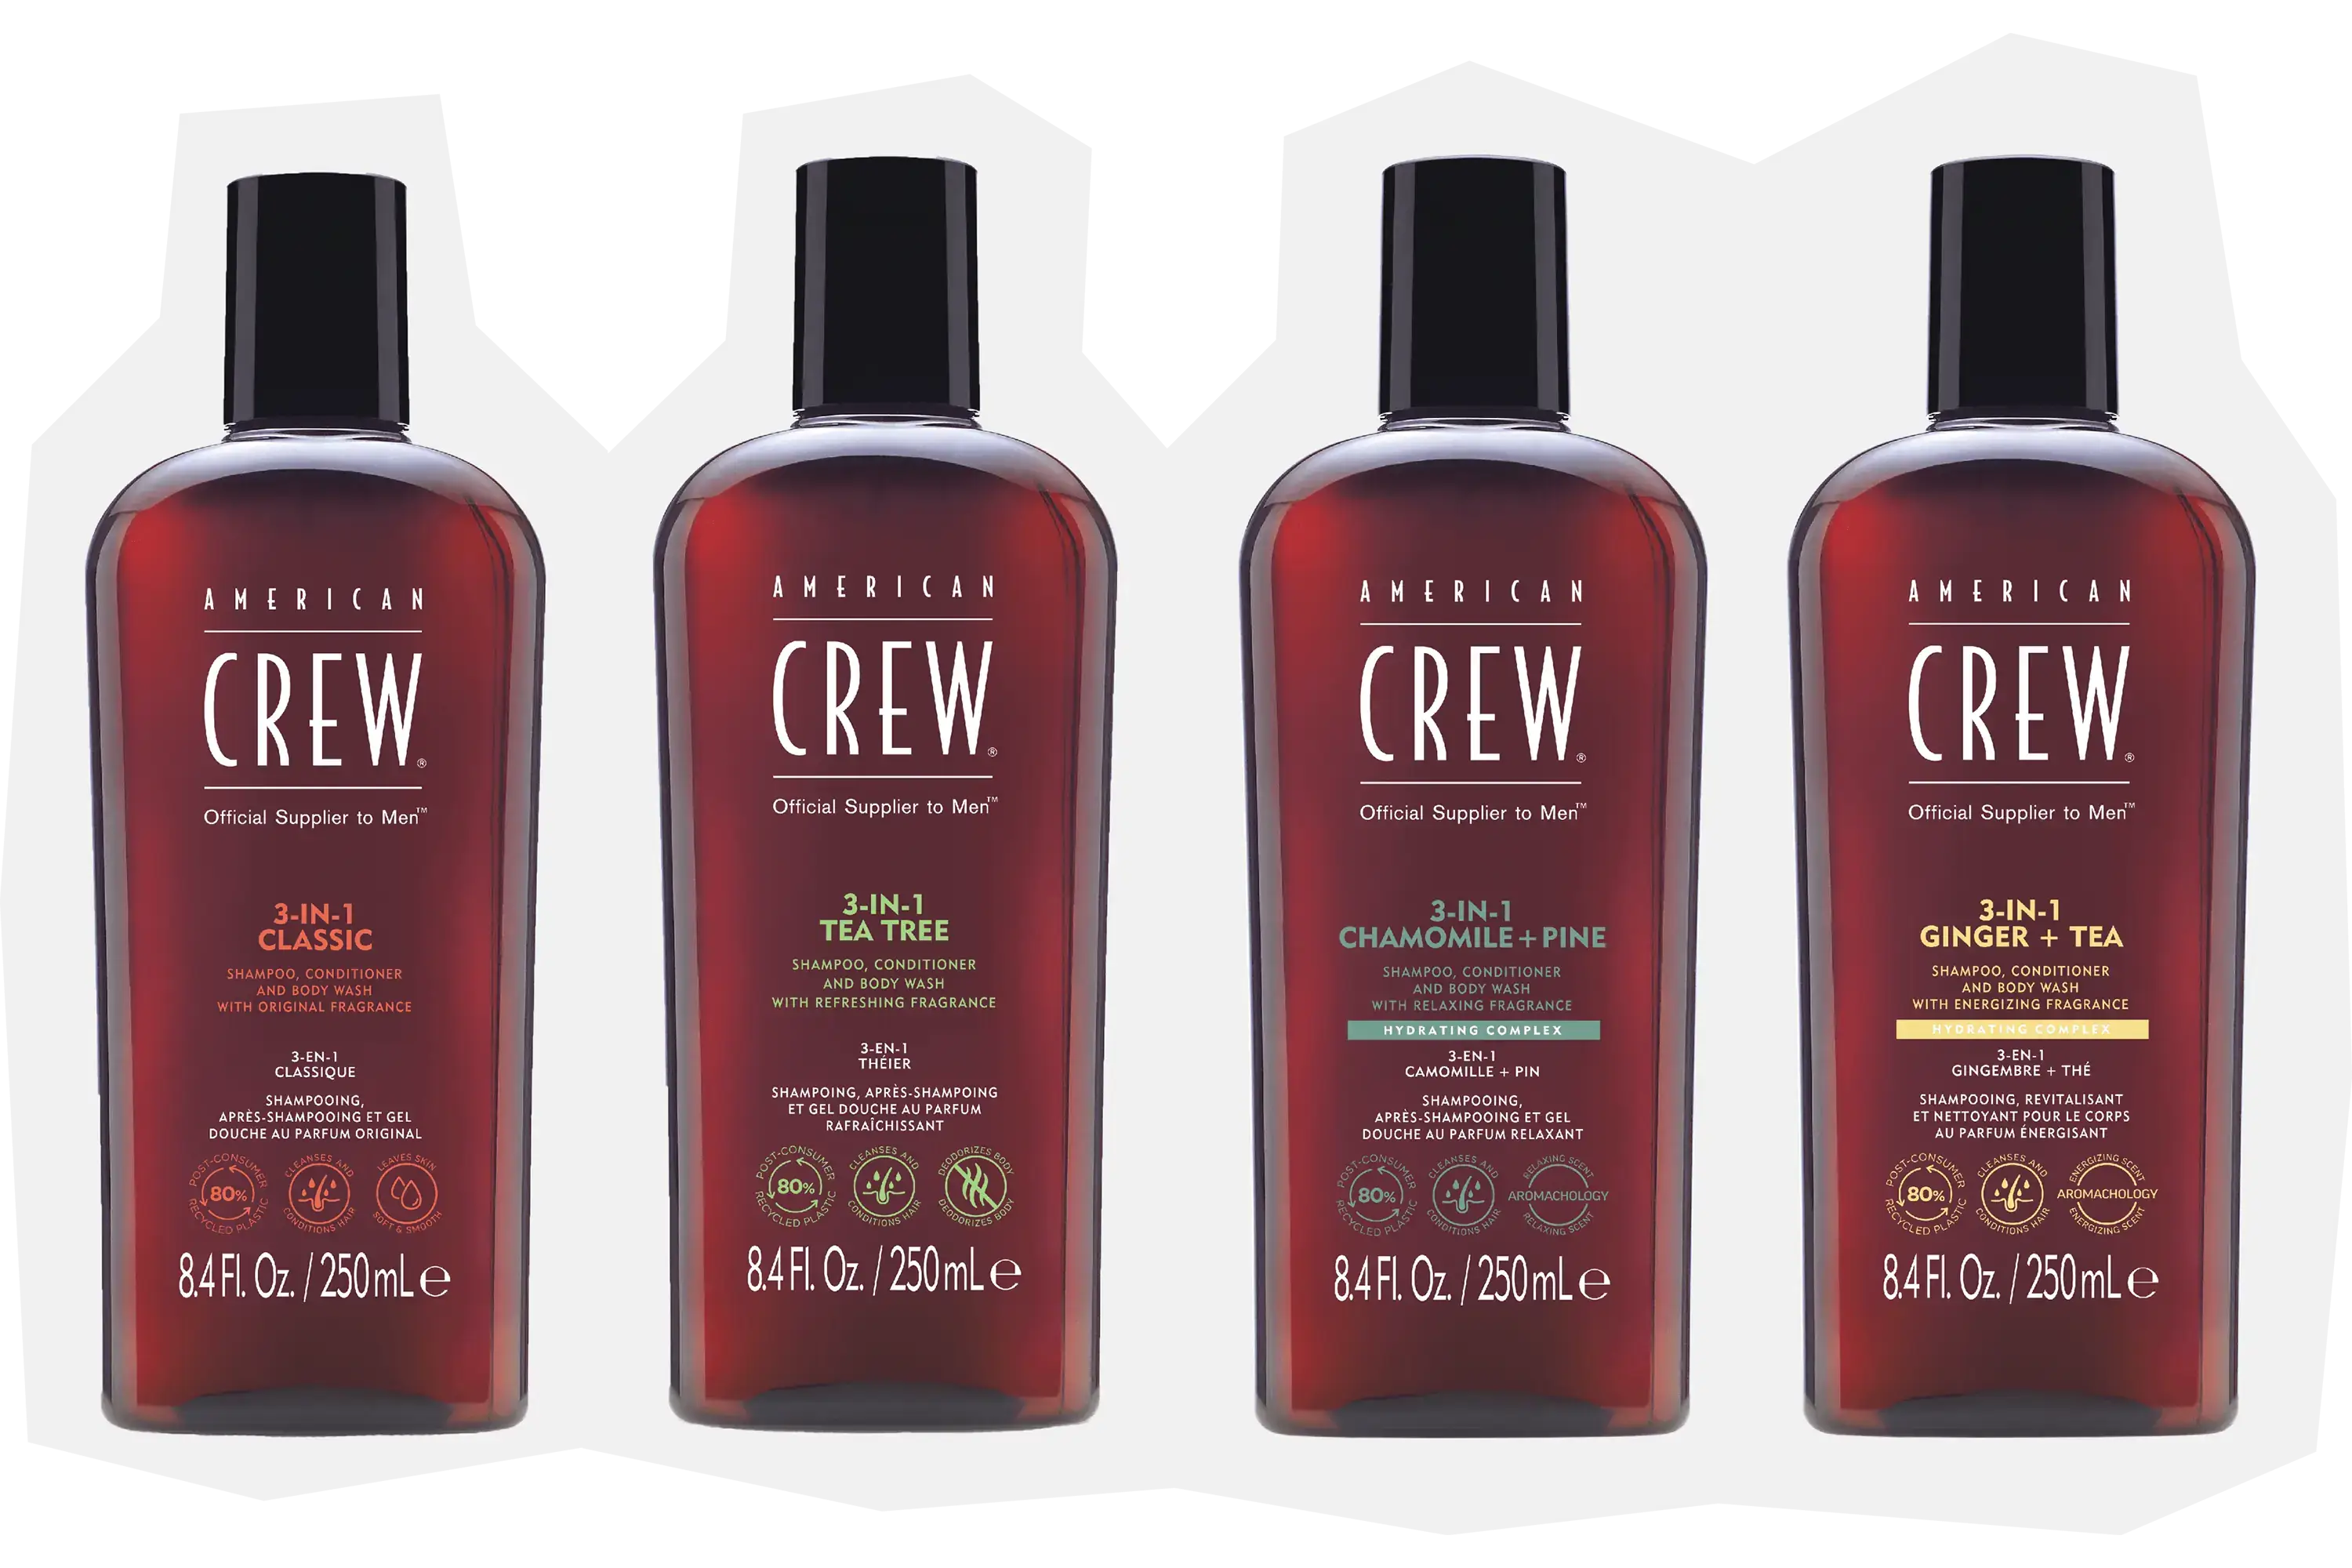 3-IN-1 Products from American Crew